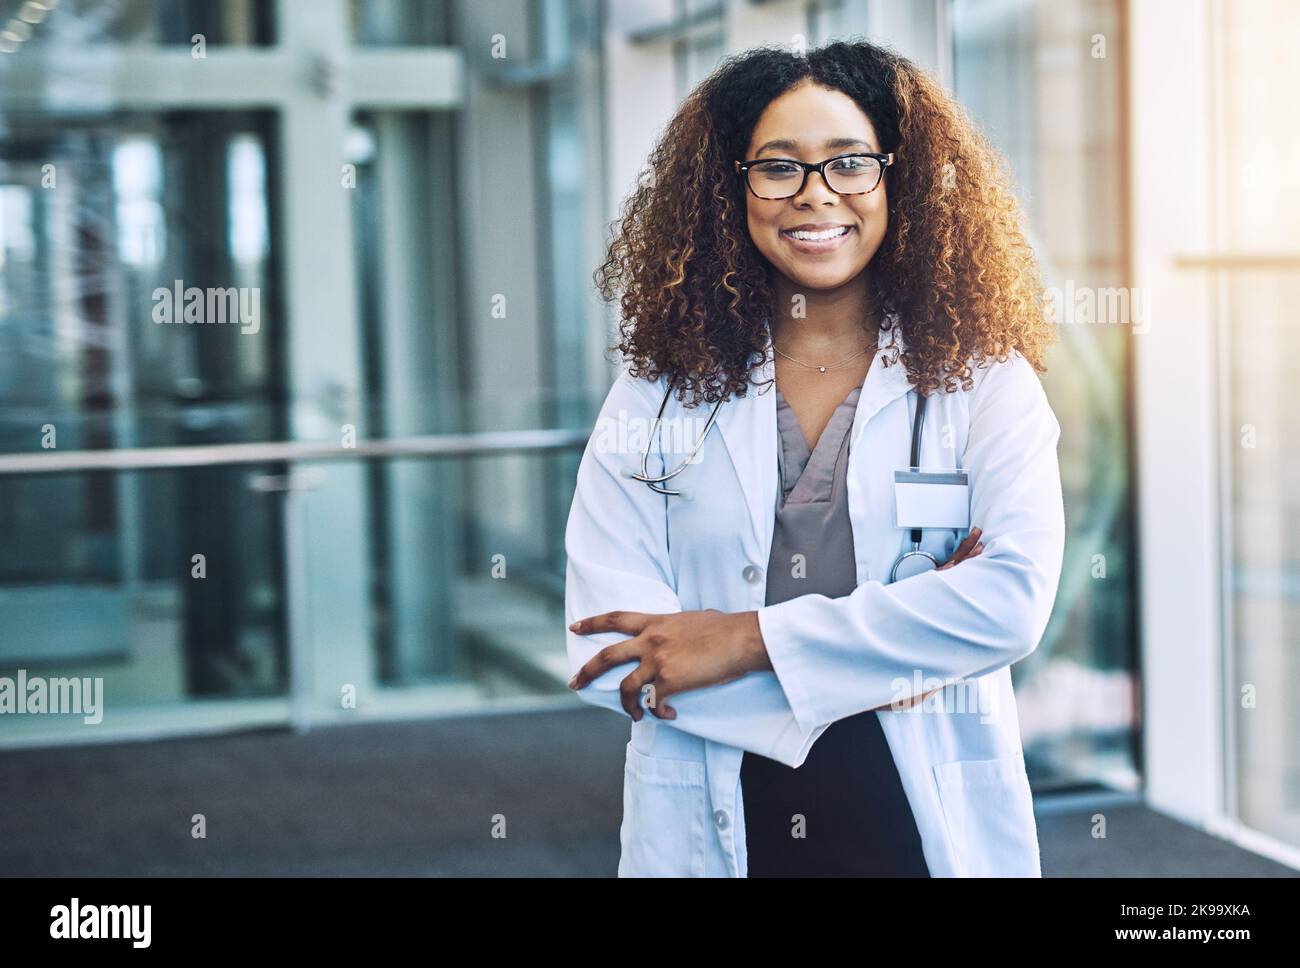 Seeing you healthy makes me happy. Portrait of a female doctor standing in a hospital. Stock Photo